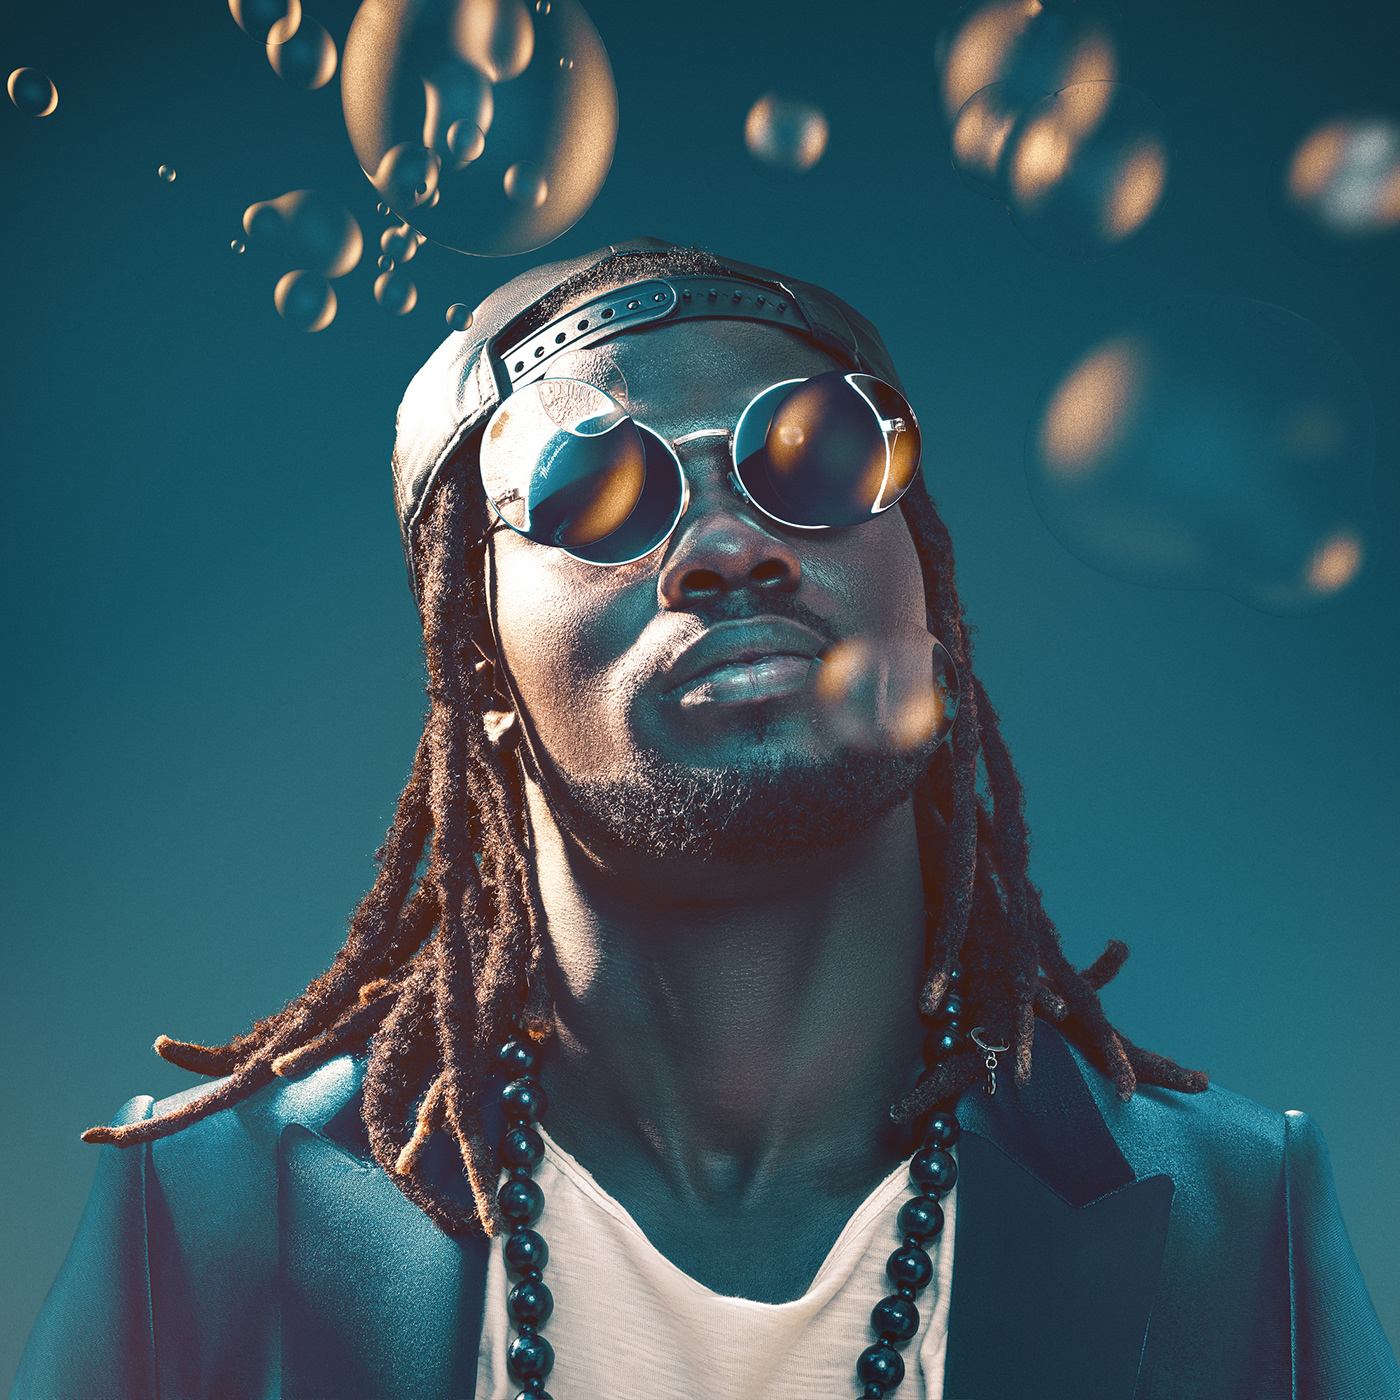 art direction  bubbles CGI colorful Moody Music artist Photography  portrait underwater water